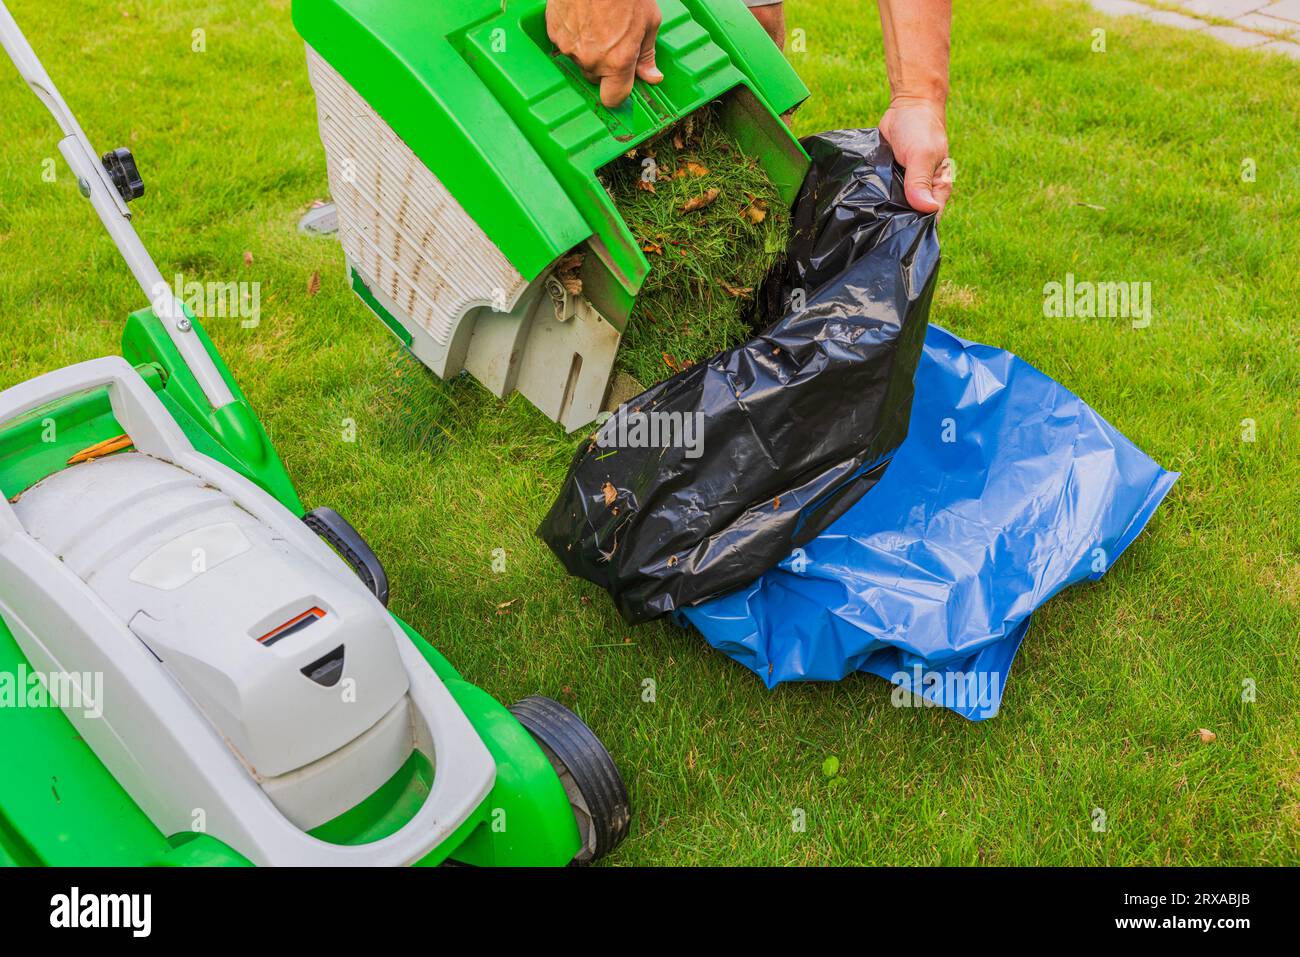 View of man pouring grass clippings from green lawn from lawnmower basket into plastic bag in garden. Sweden. Stock Photo